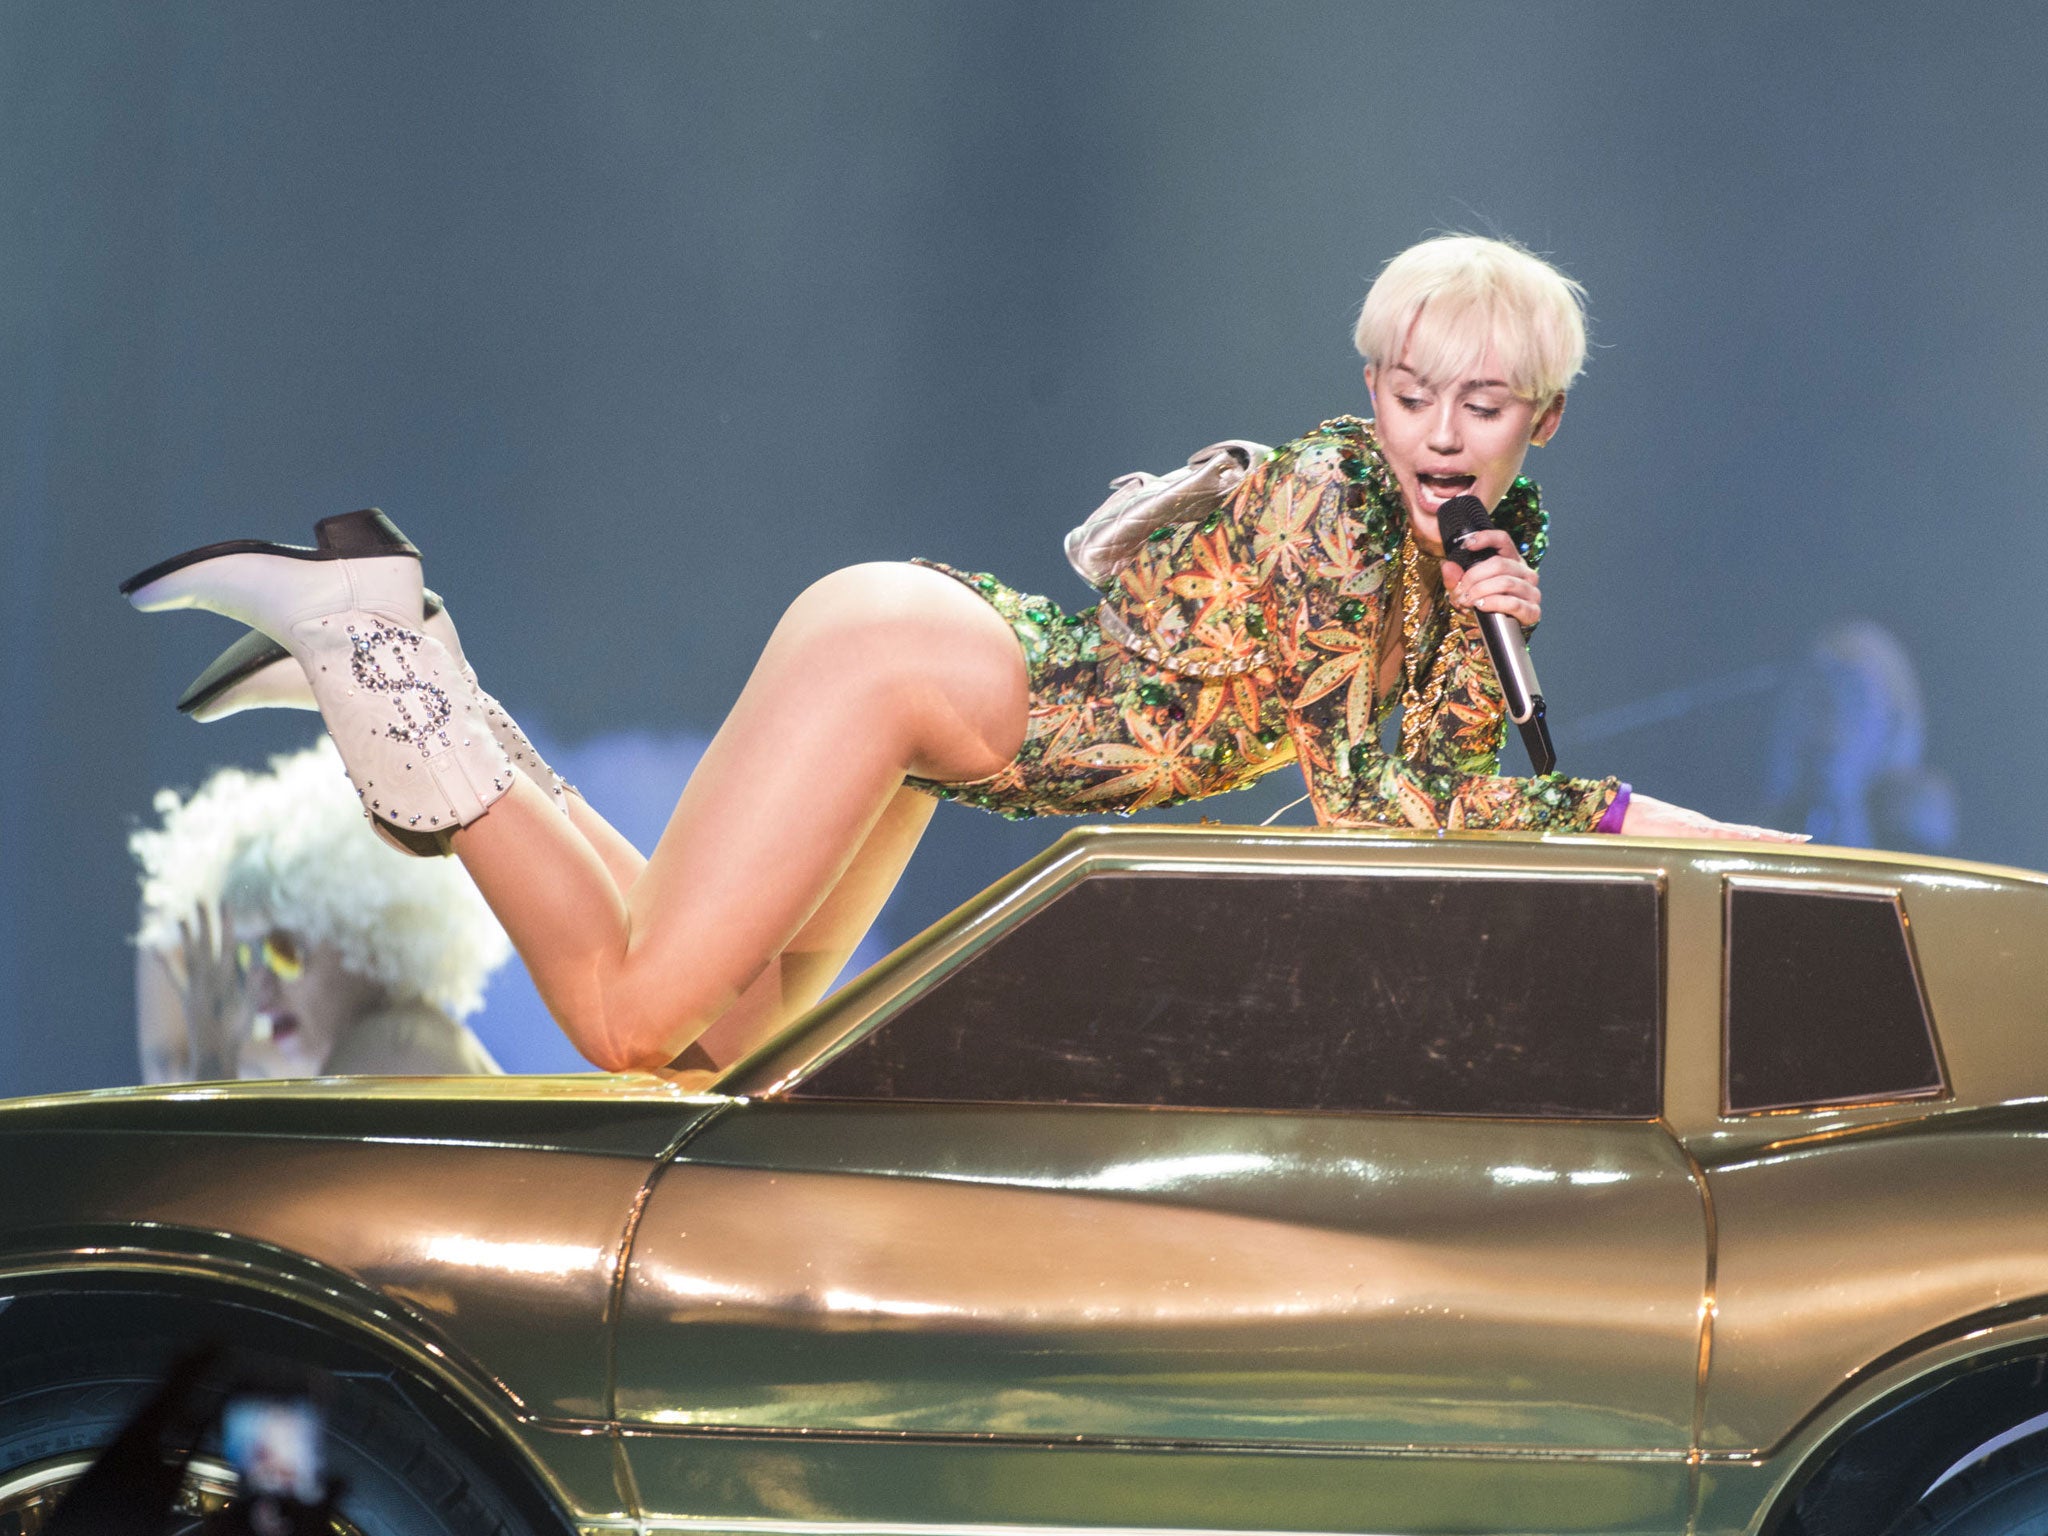 Miley wore white boots with dollar signs on as she cavorted around on a gold car